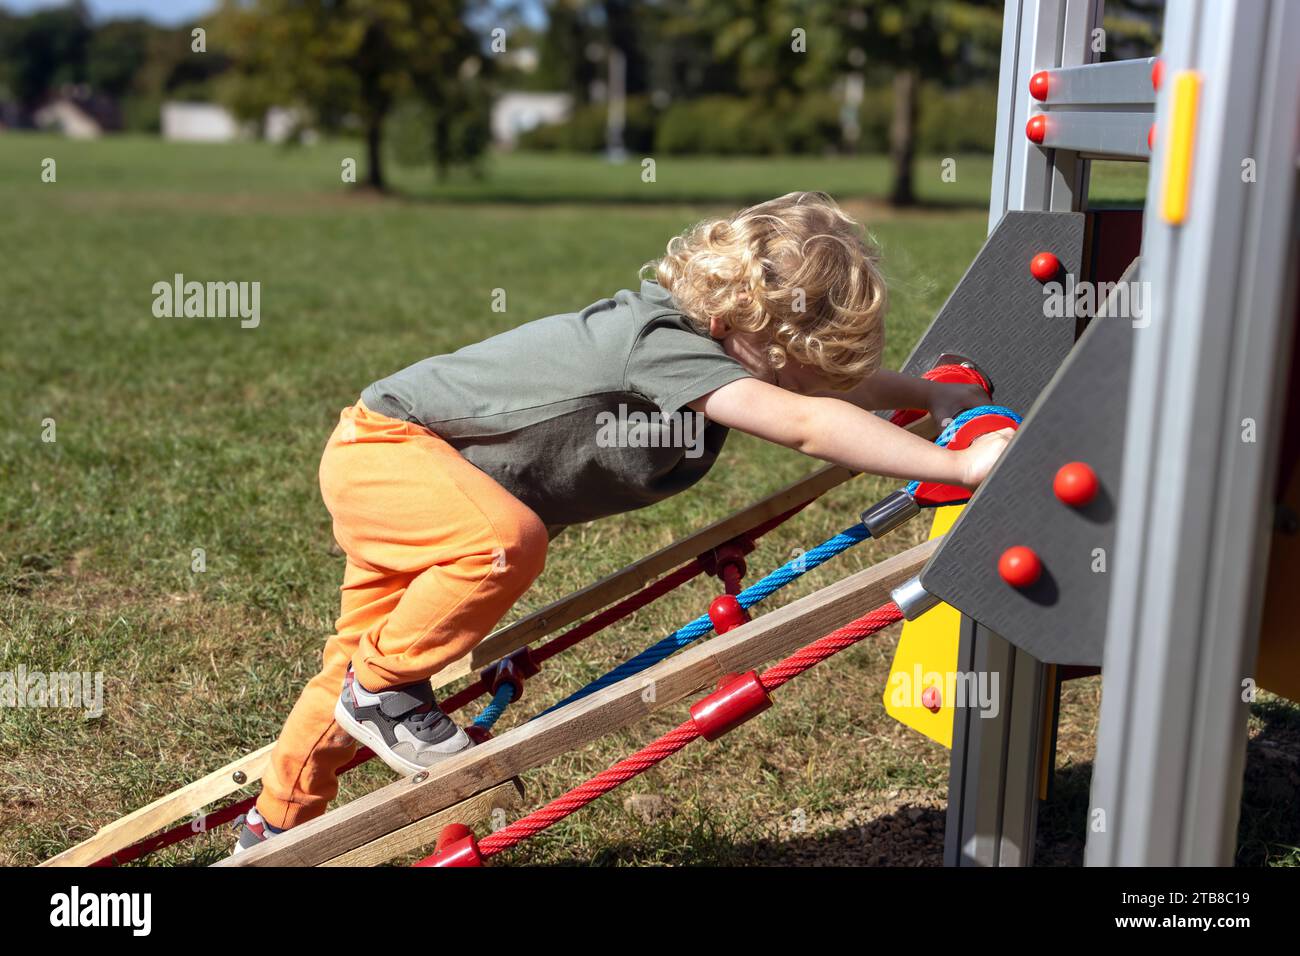 A little boy climbs on a slide in the children's playground Stock Photo